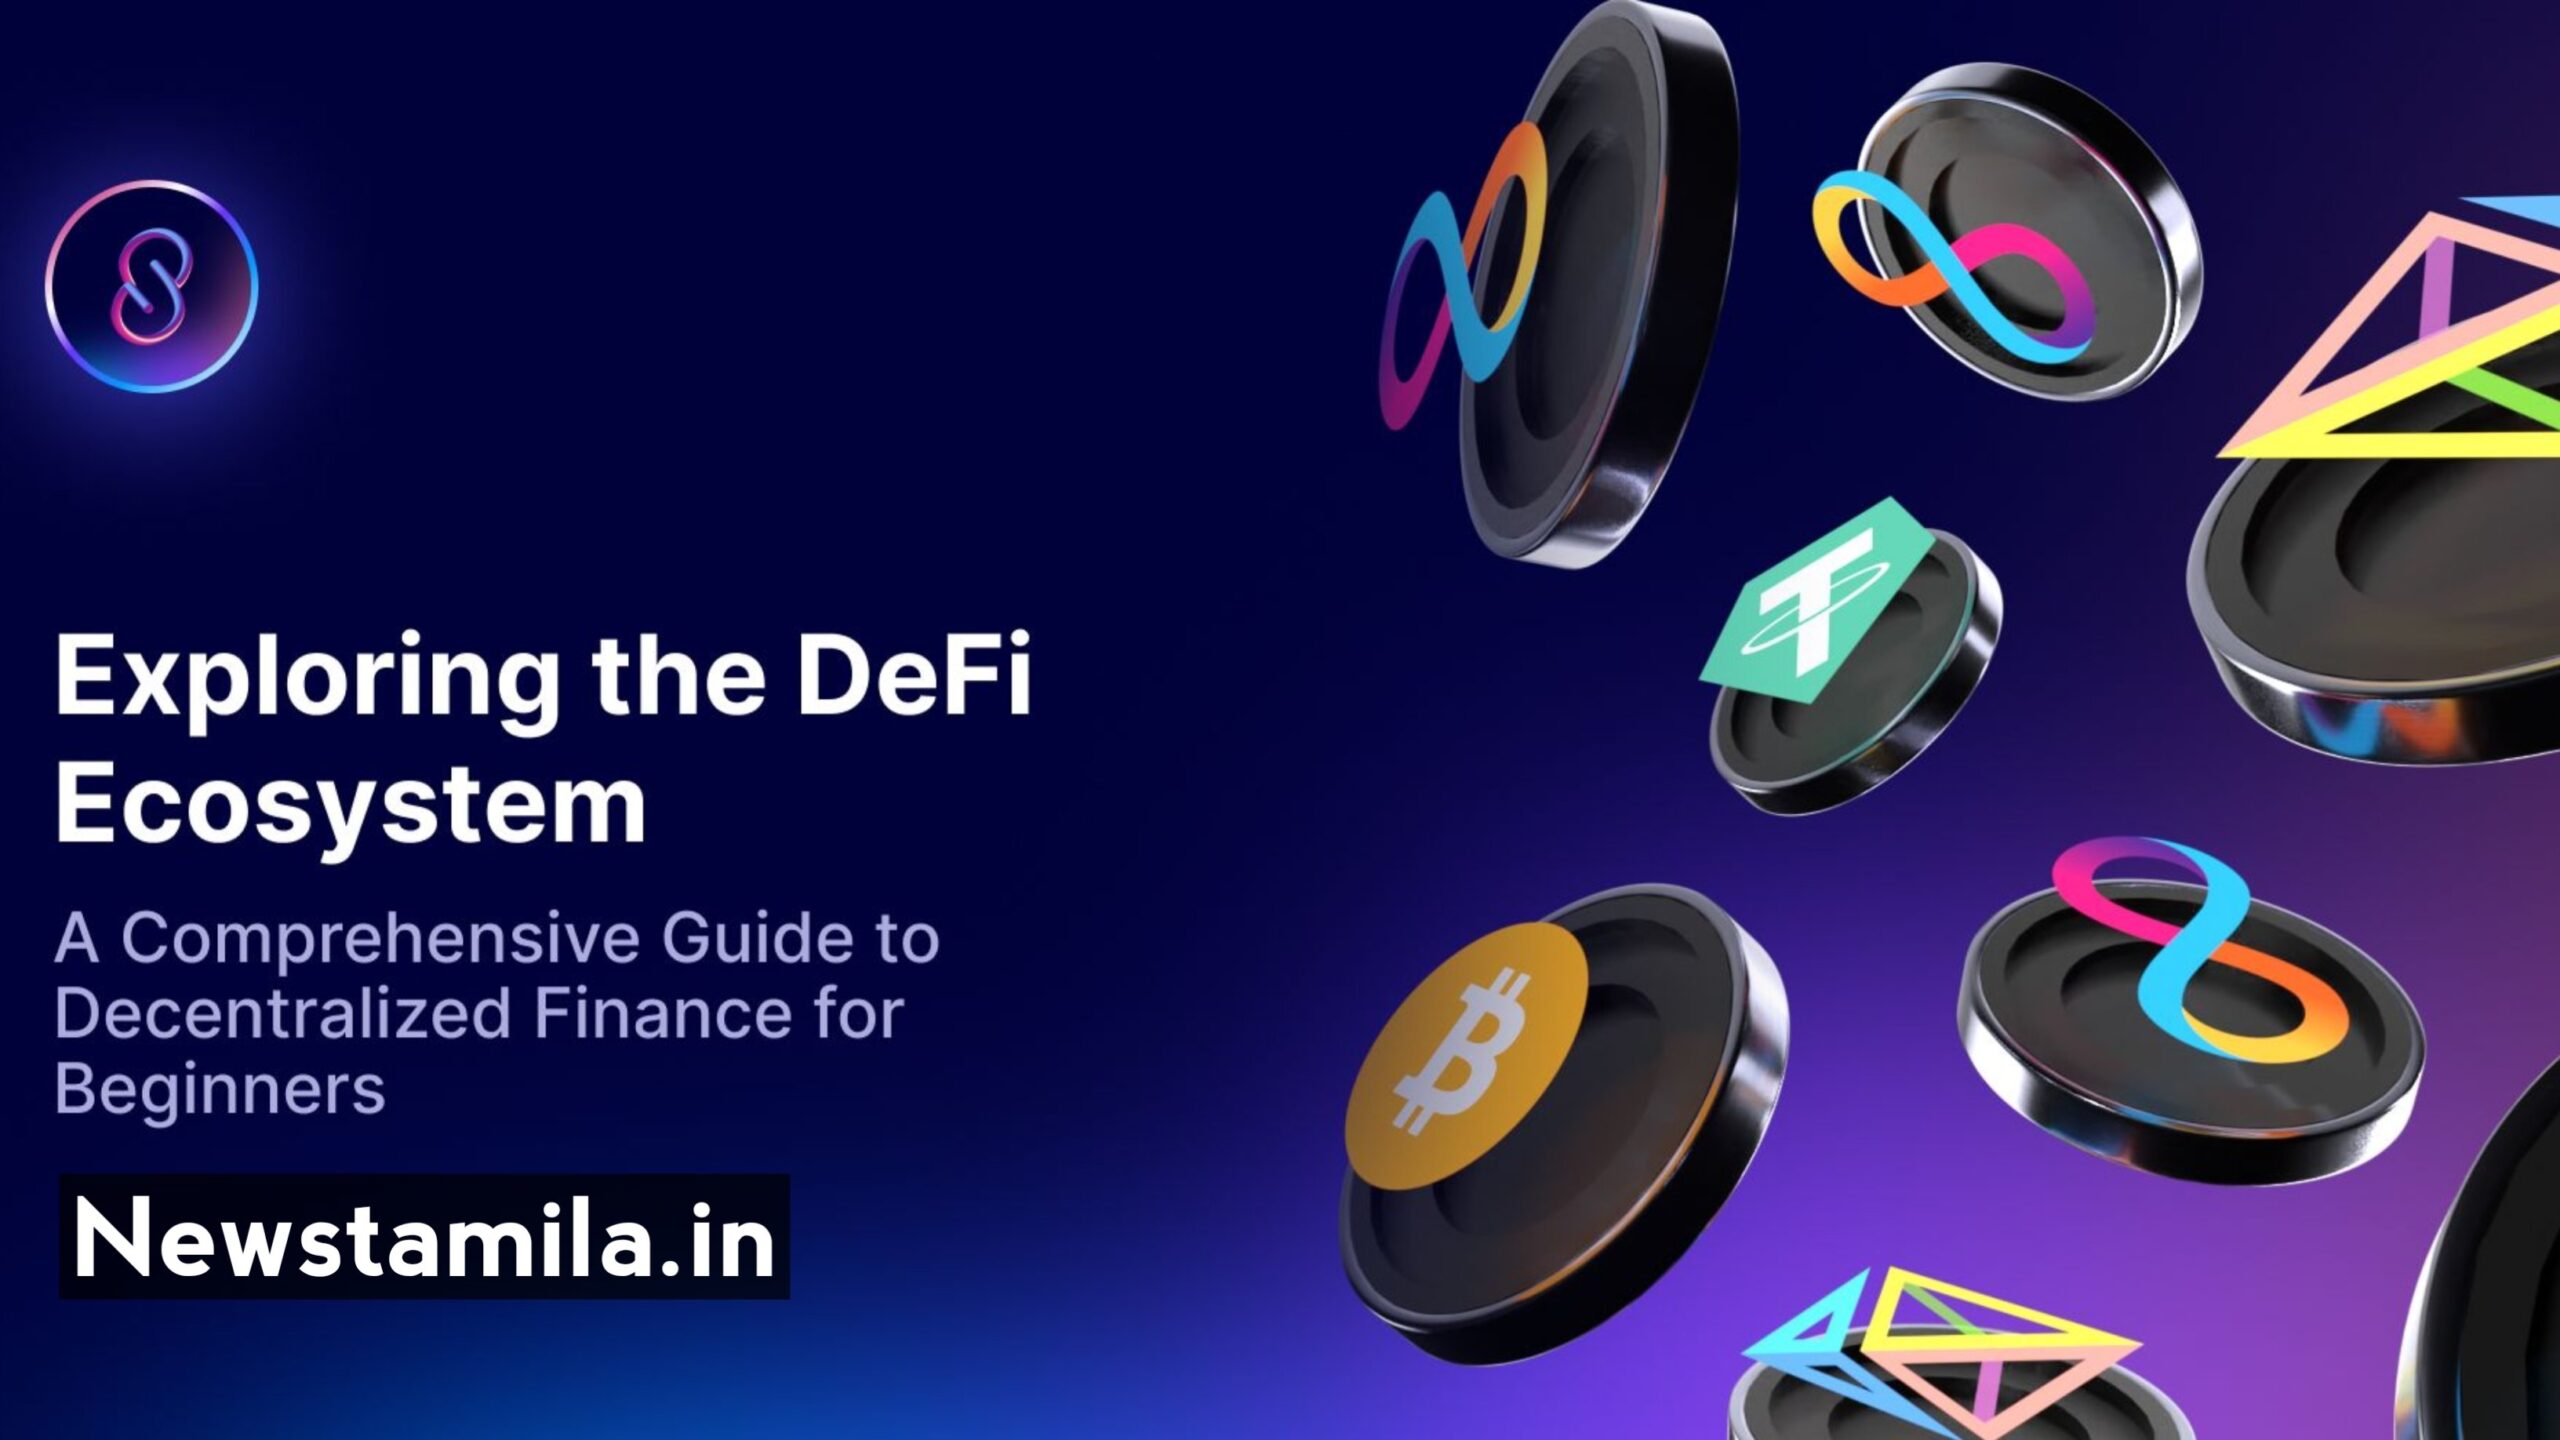 DeFi – The Evolution of Cryptocurrency with a Vengeance